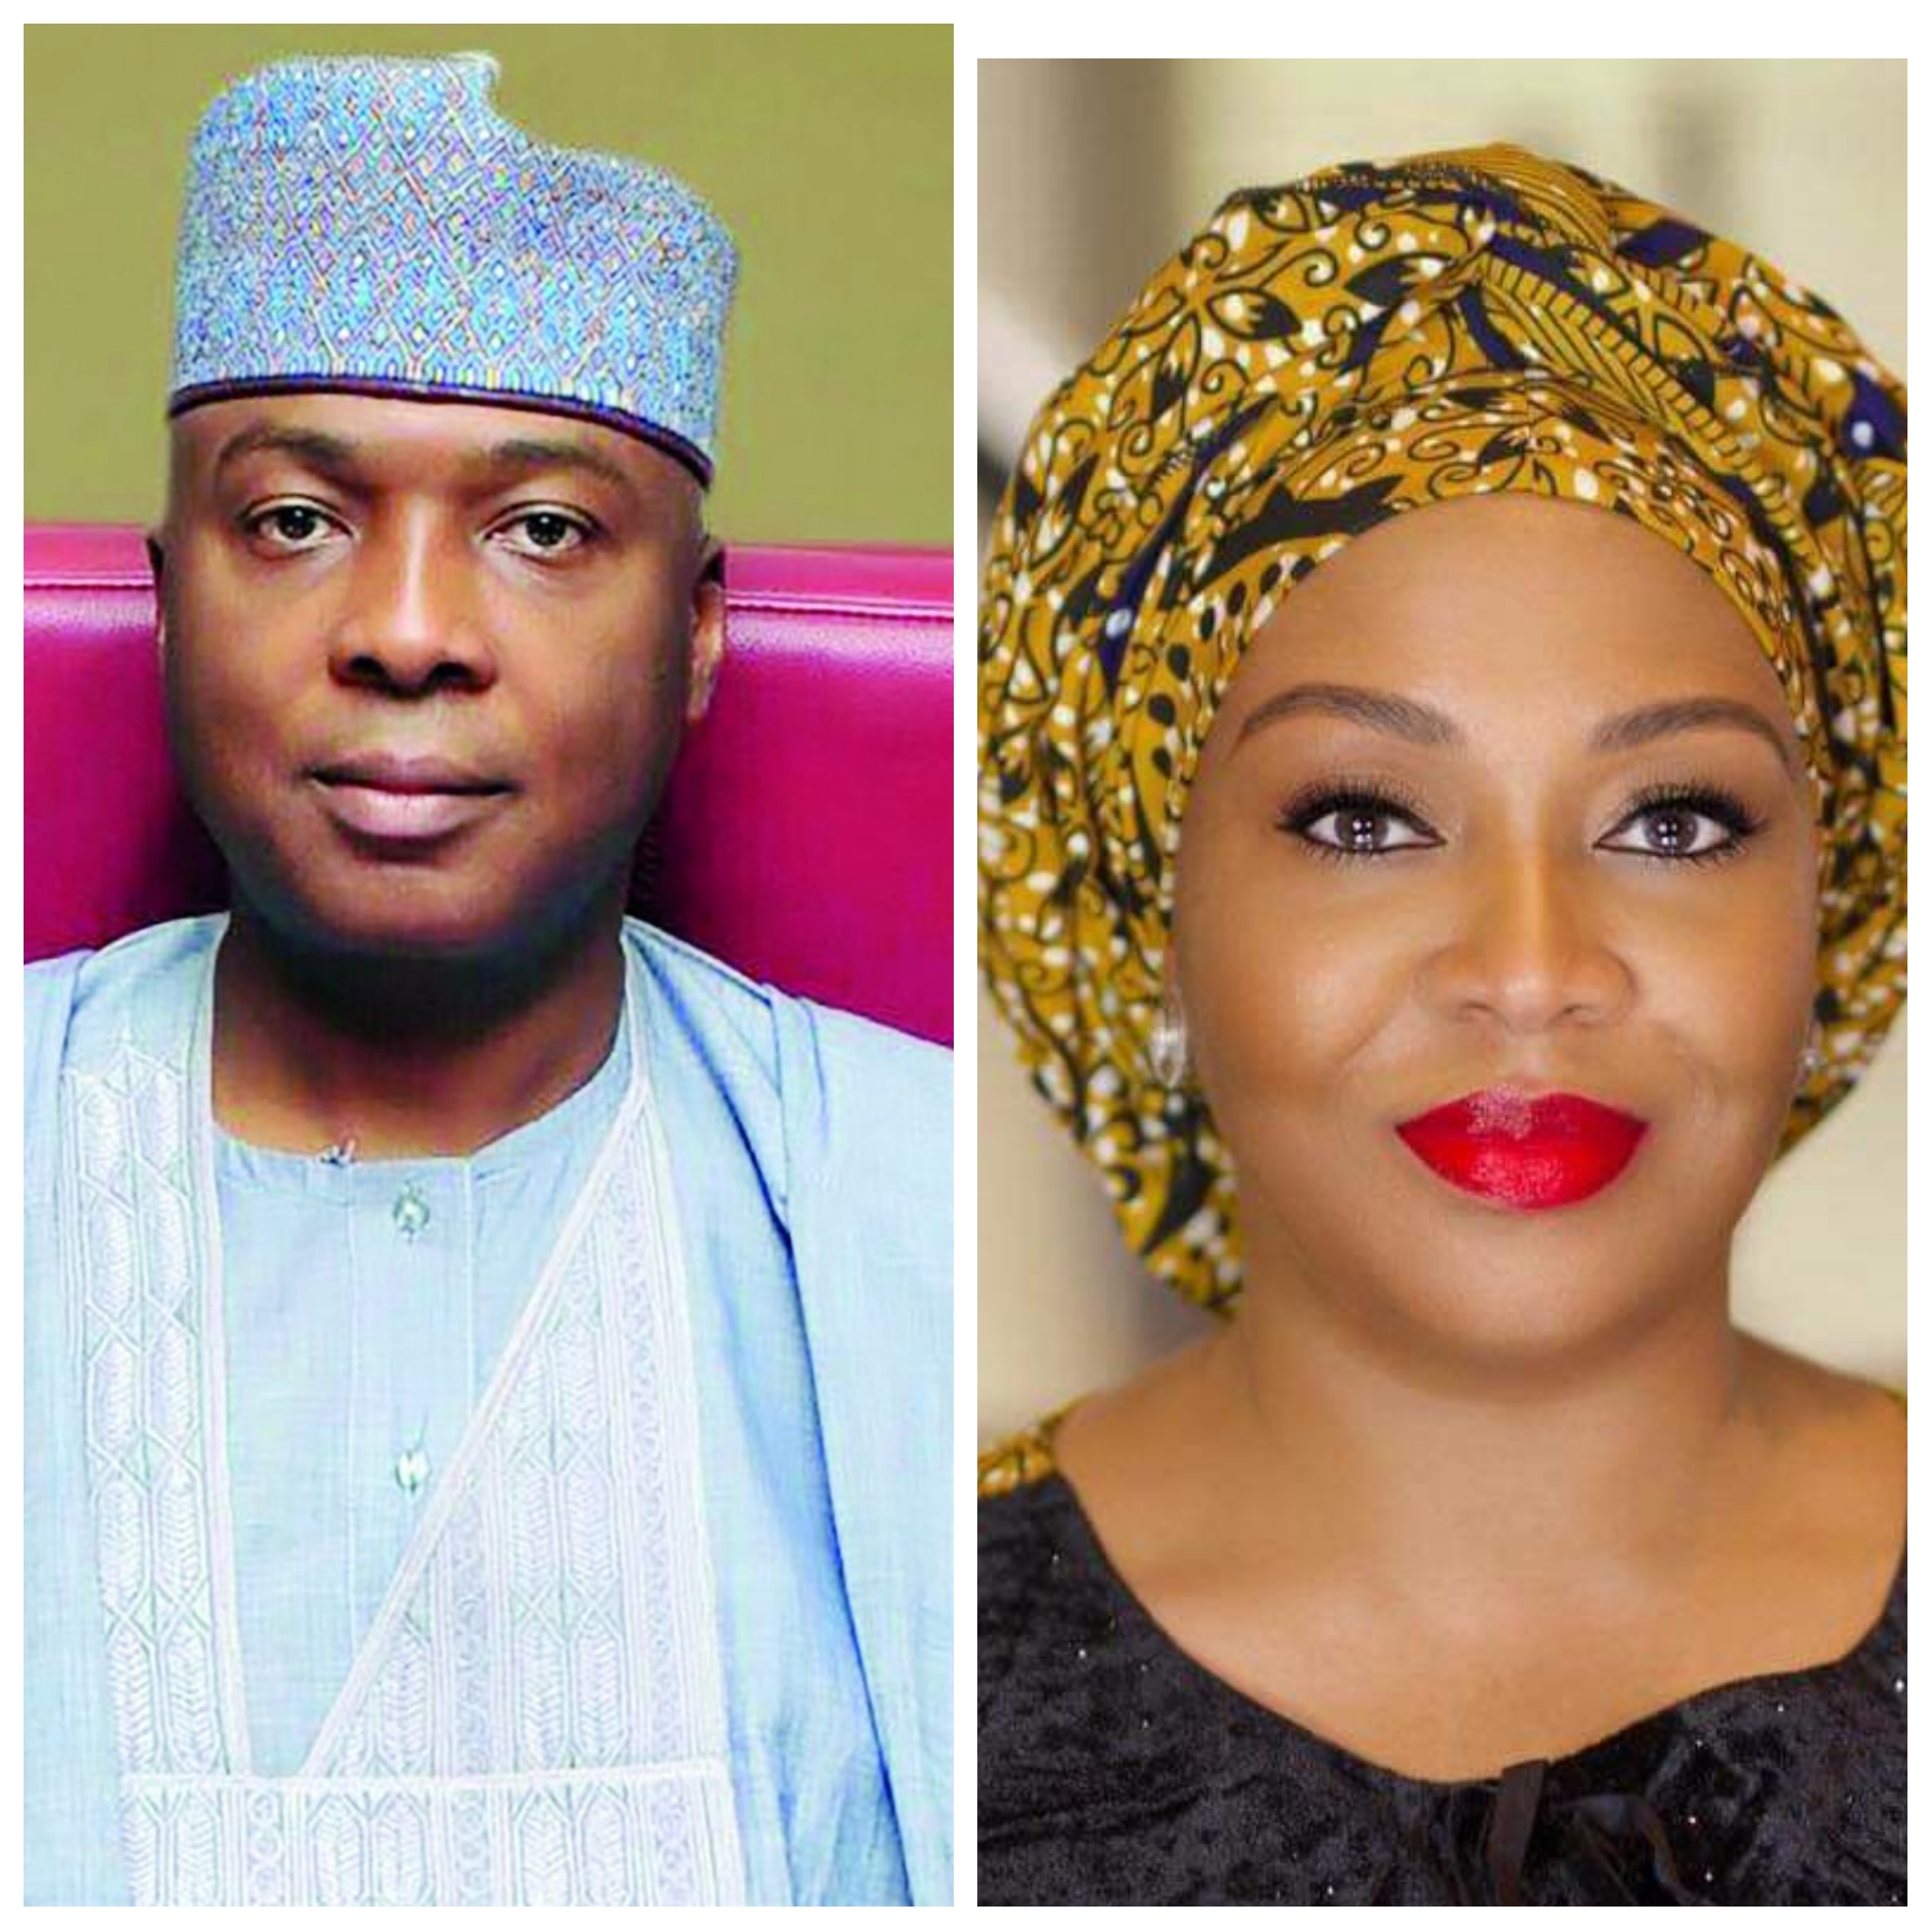 Gbemisola Saraki ends sibling rivalry with older brother, wishes him well at 60